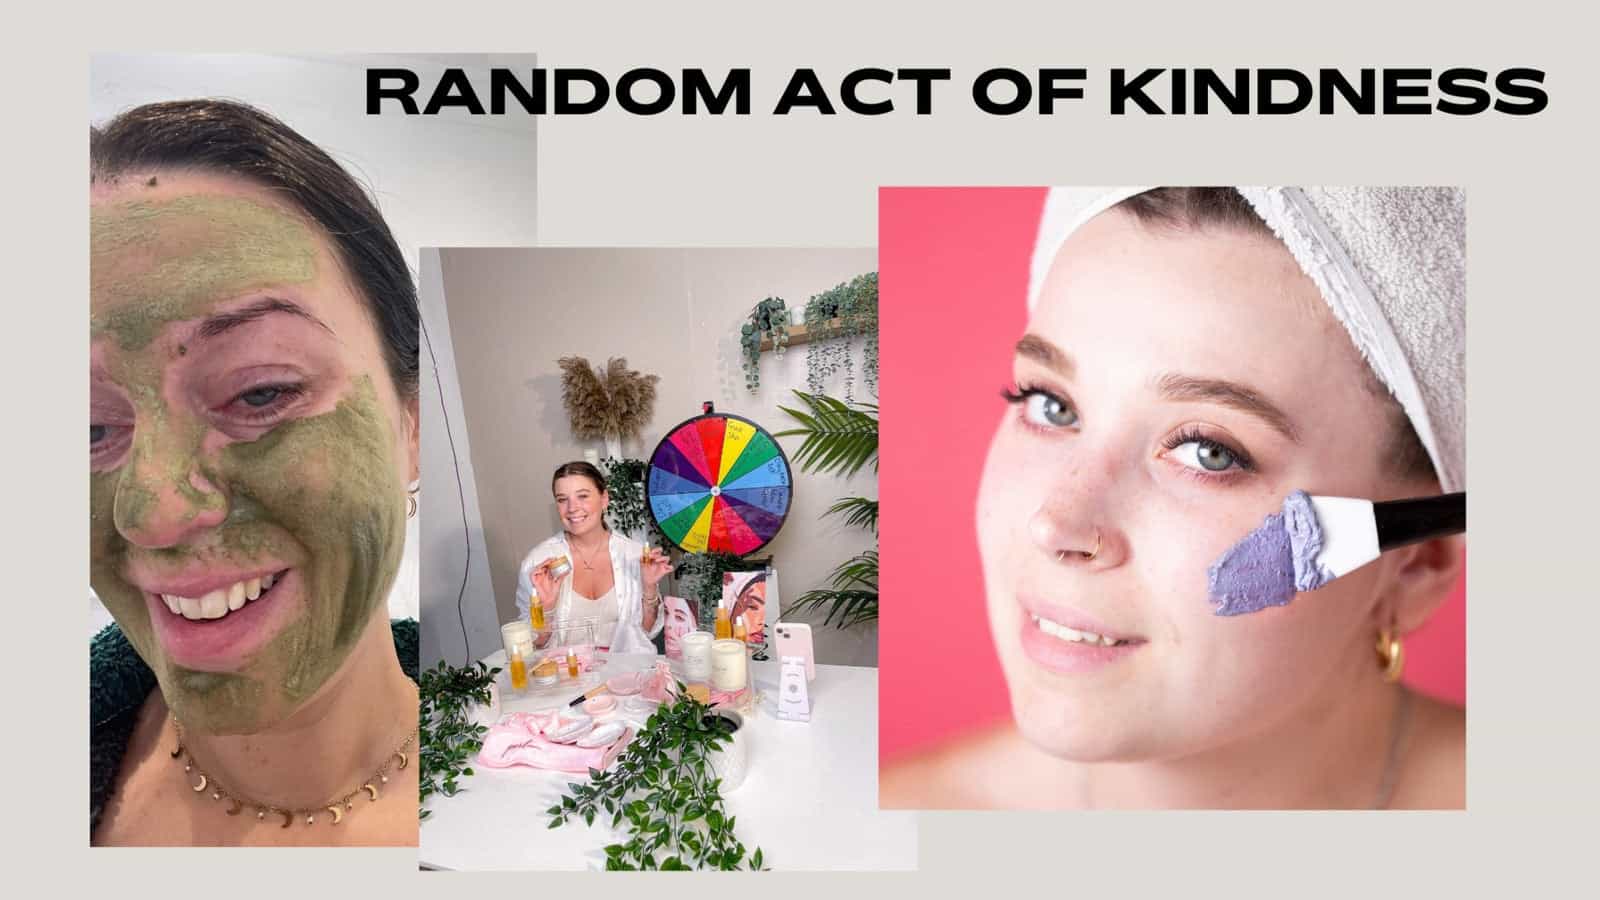 What we've done to celebrate Random Act of Kindness Day - PERL Cosmetics